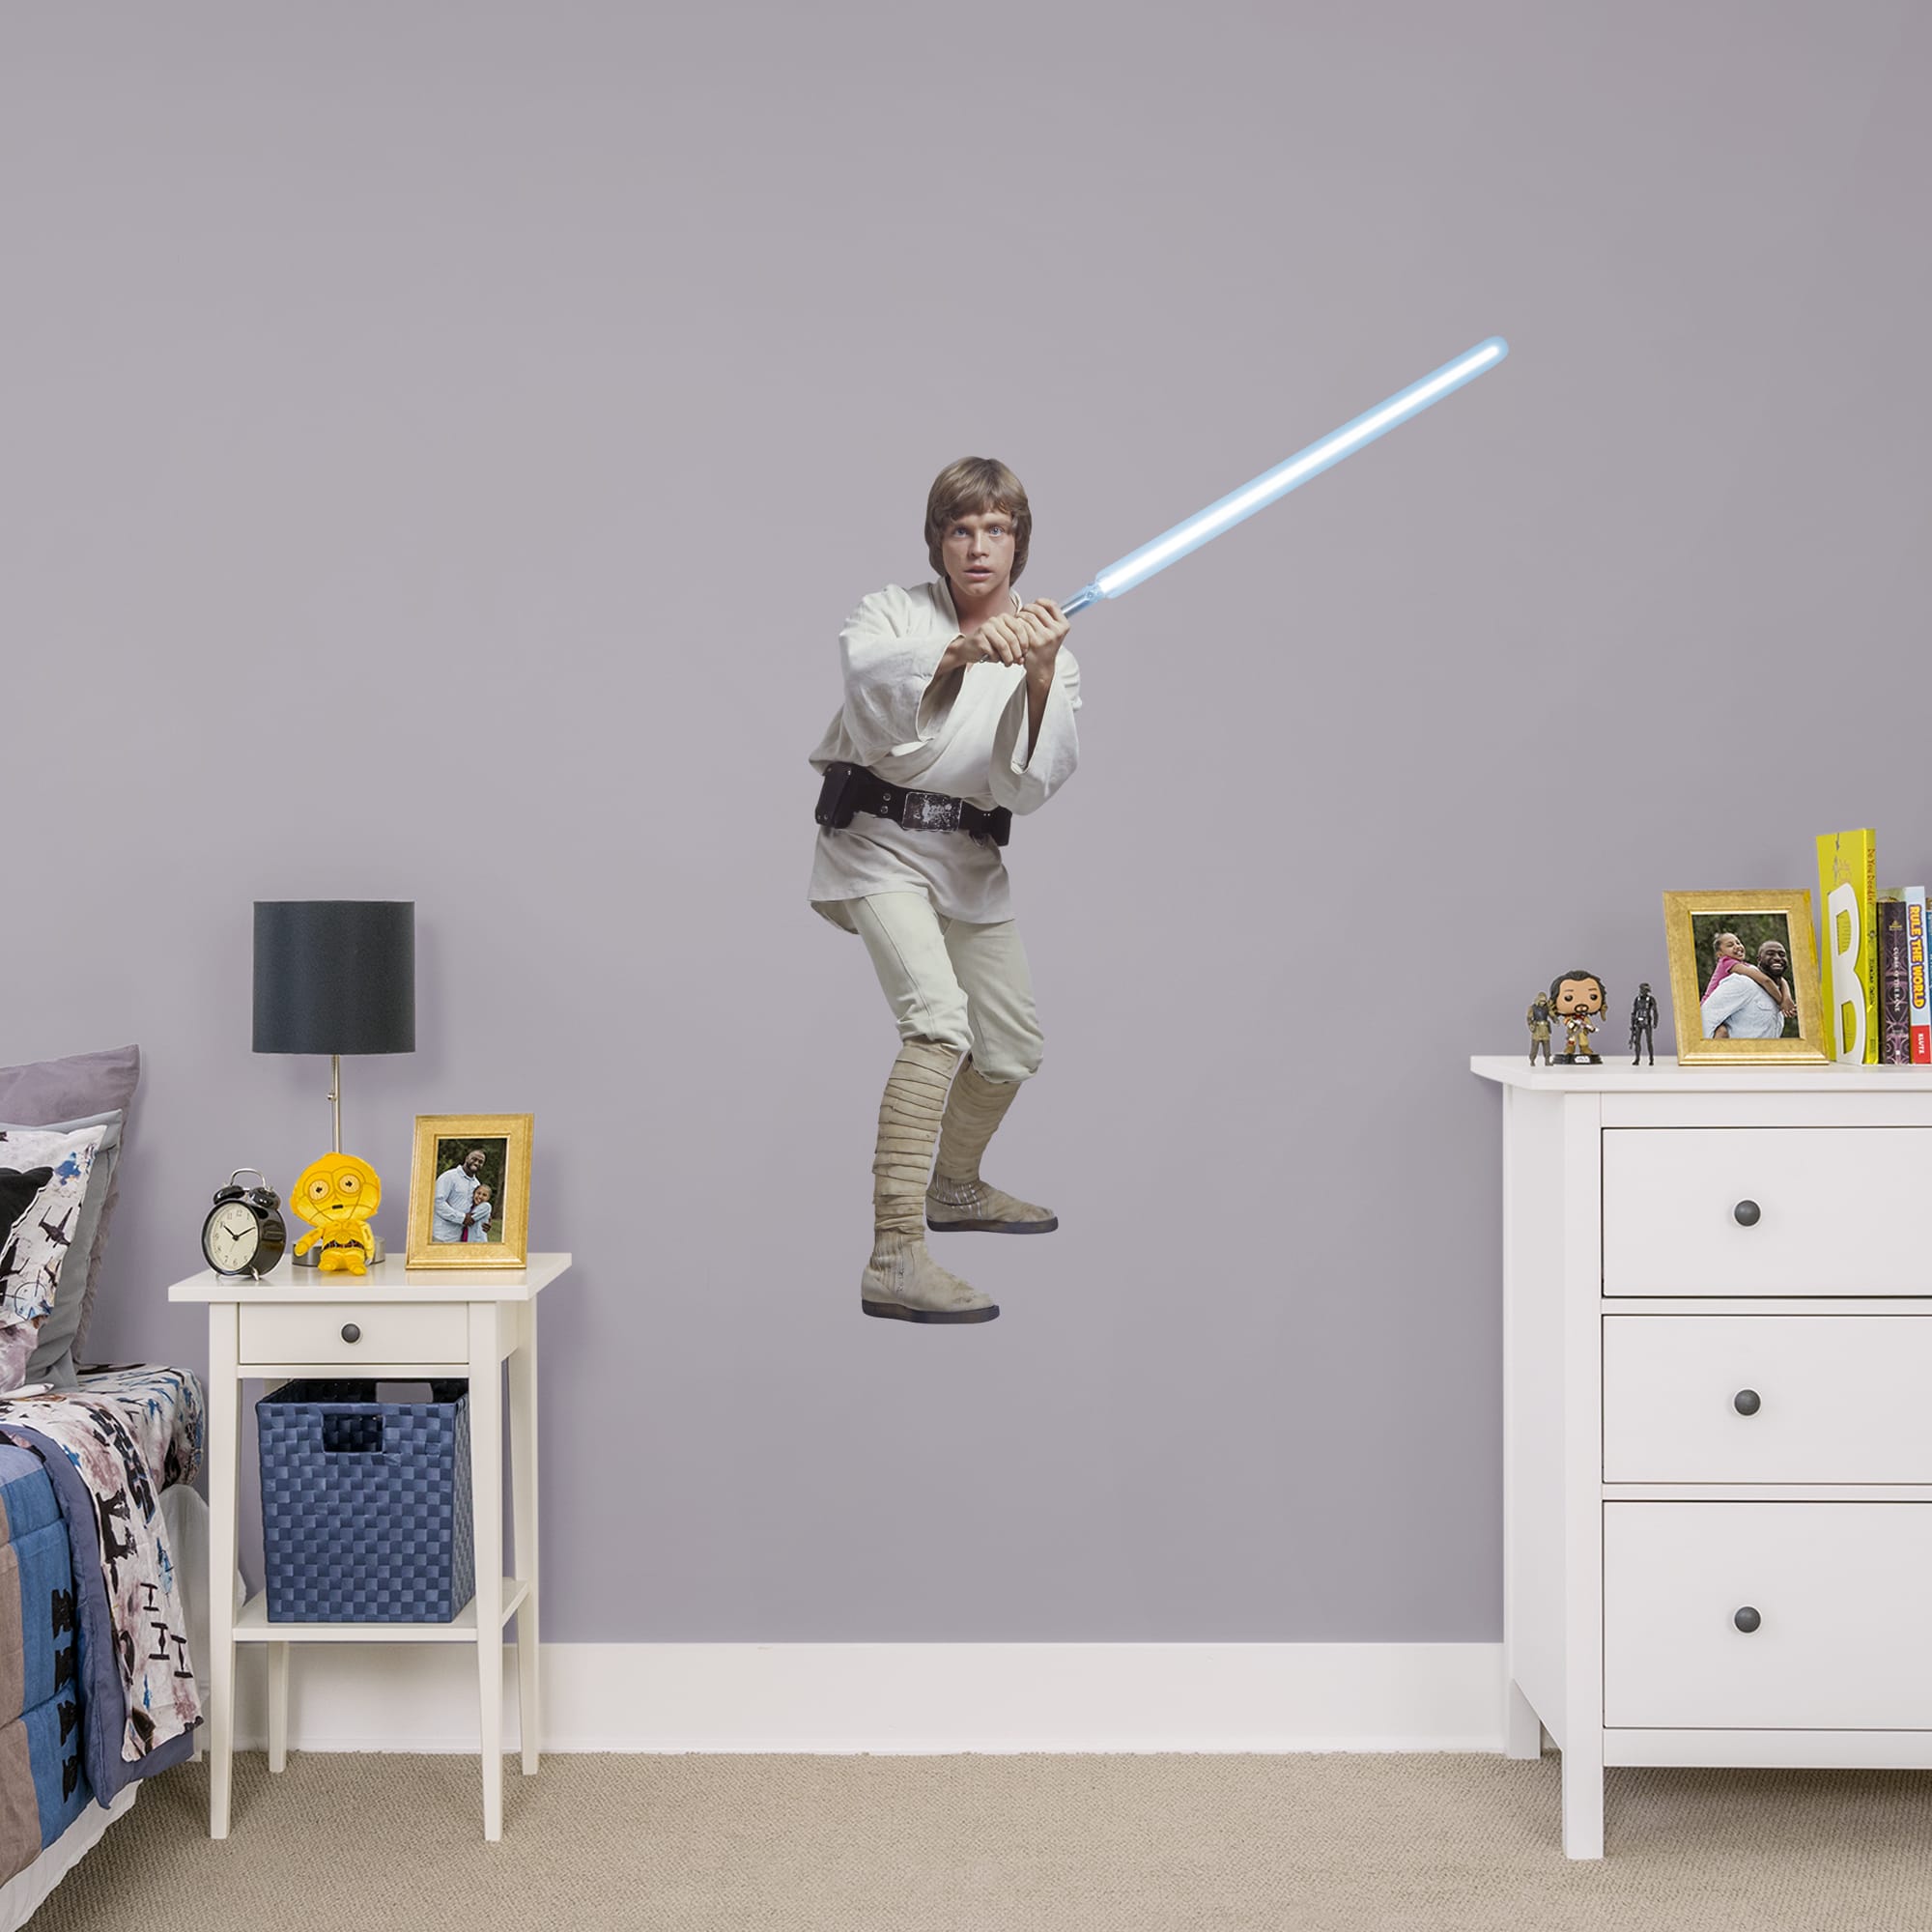 Luke Skywalker - Officially Licensed Removable Wall Decal Giant Character + 2 Decals (42"W x 58"H) by Fathead | Vinyl